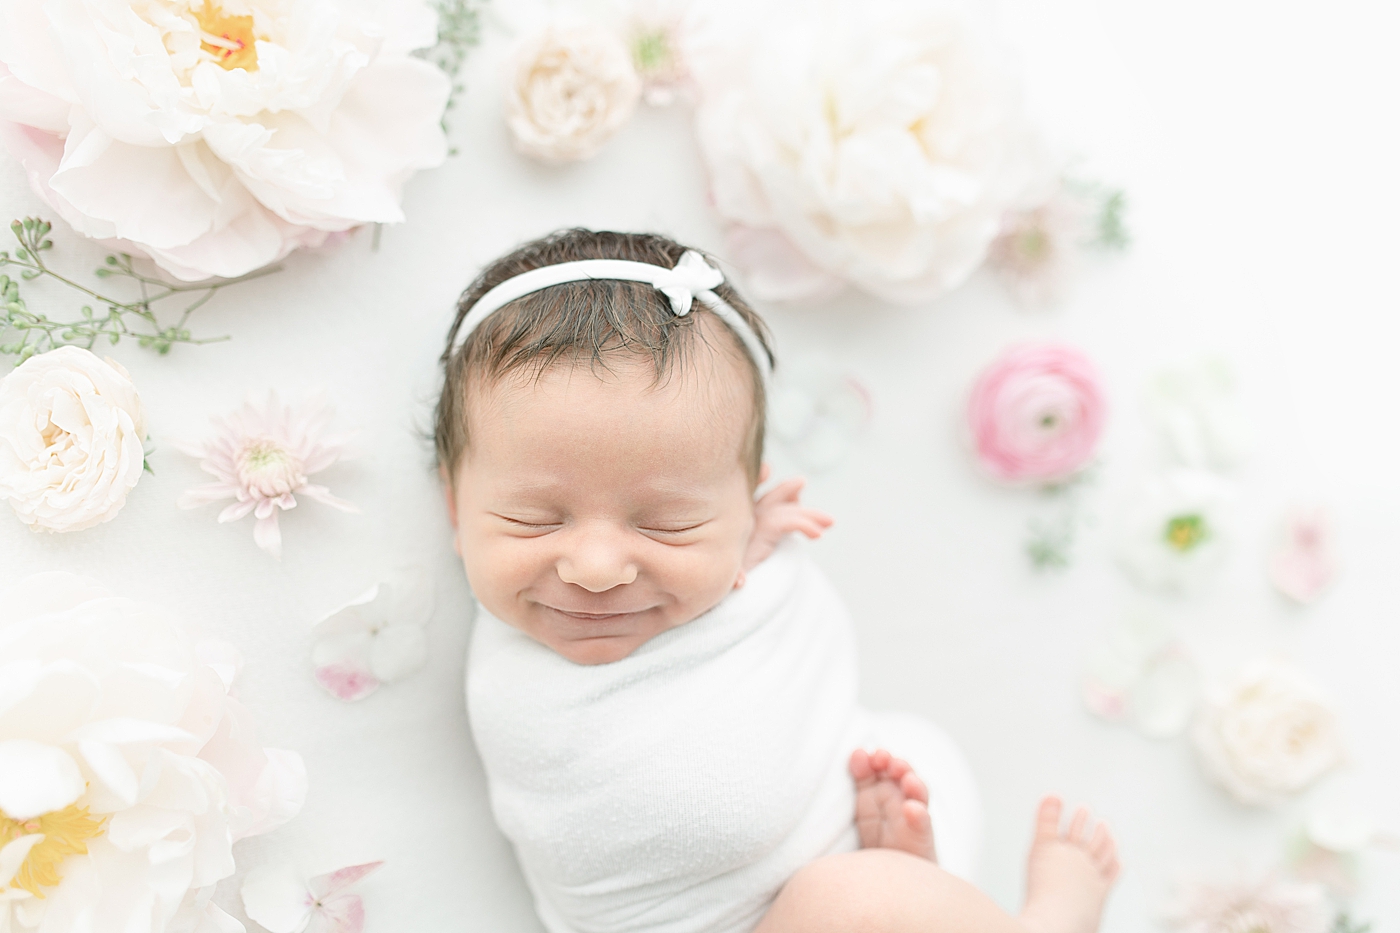 Smiling newborn baby girl surrounded by flowers | Photo by Little Sunshine Photography 